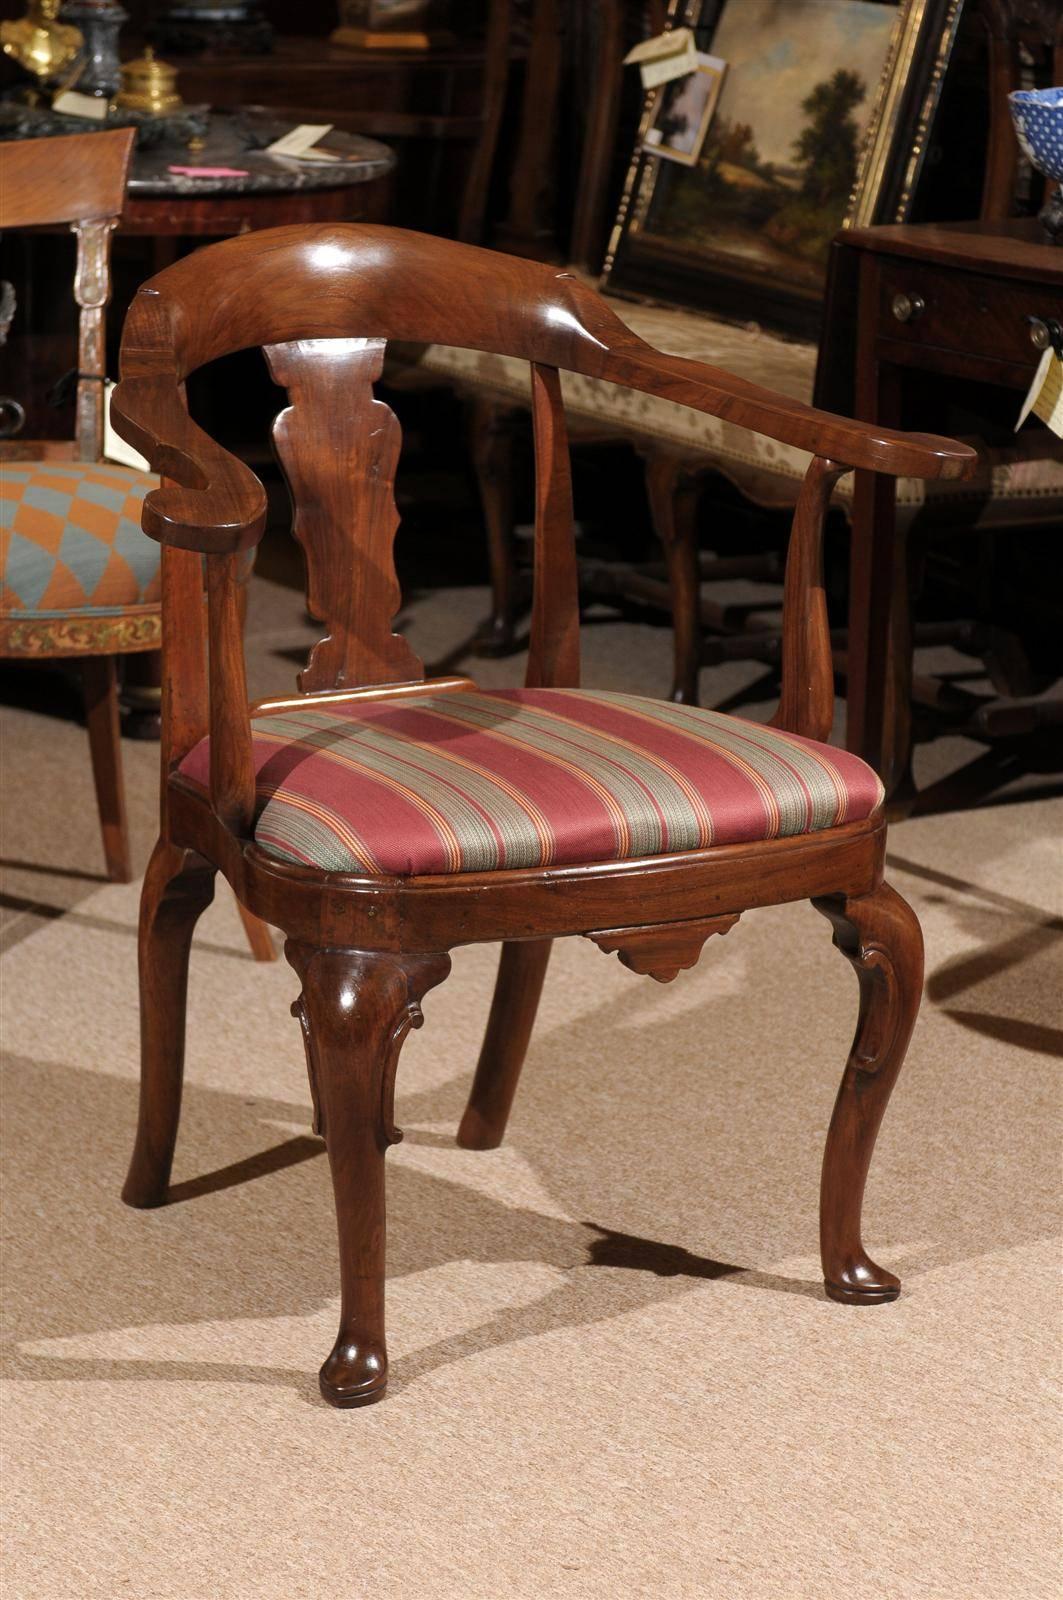 Late 18th century Italian desk chair in walnut with curved back, shaped back splat, cabriole legs and pad feet.